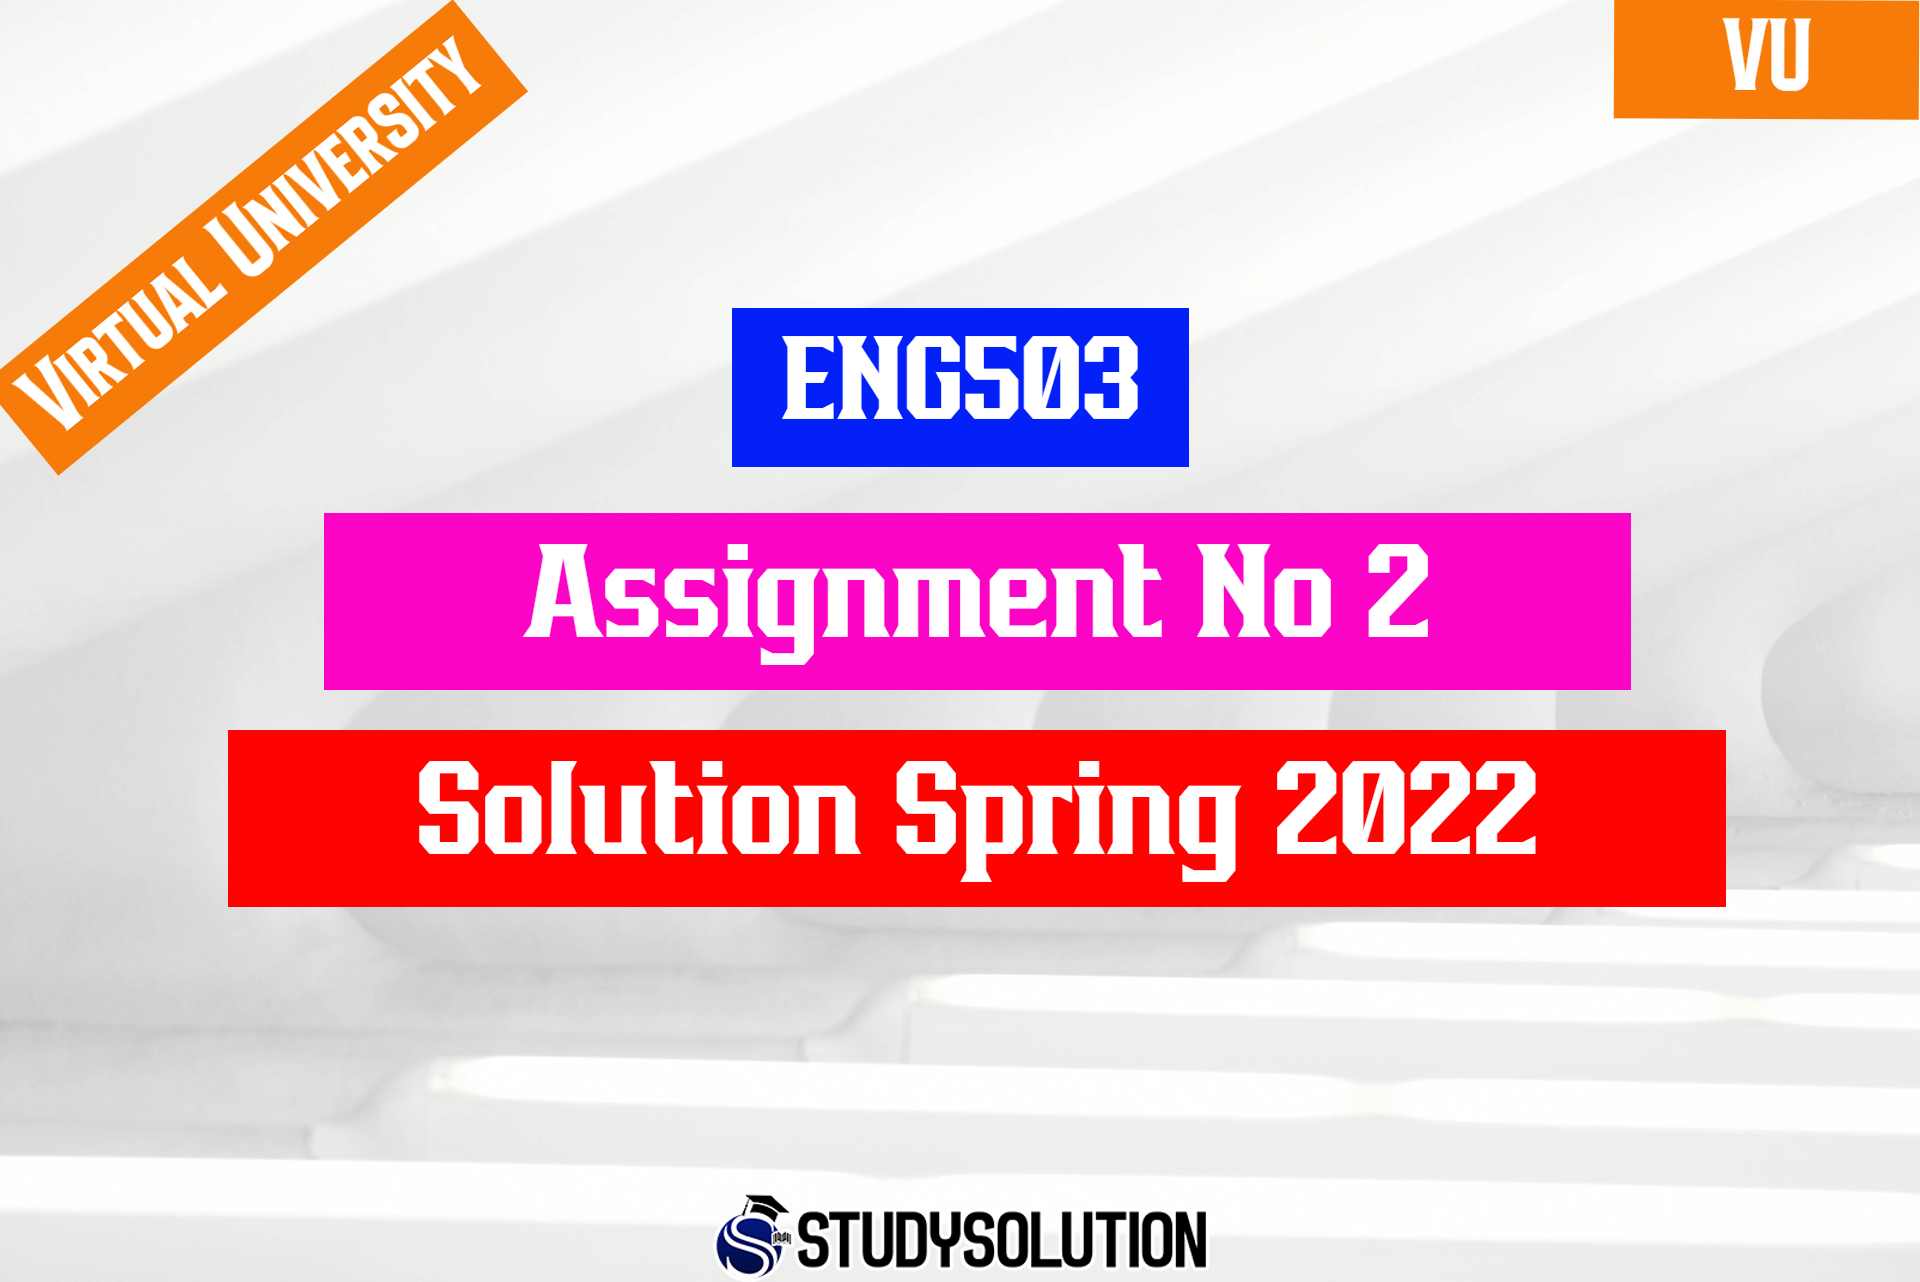 ENG503 Assignment No 2 Solution Spring 2022